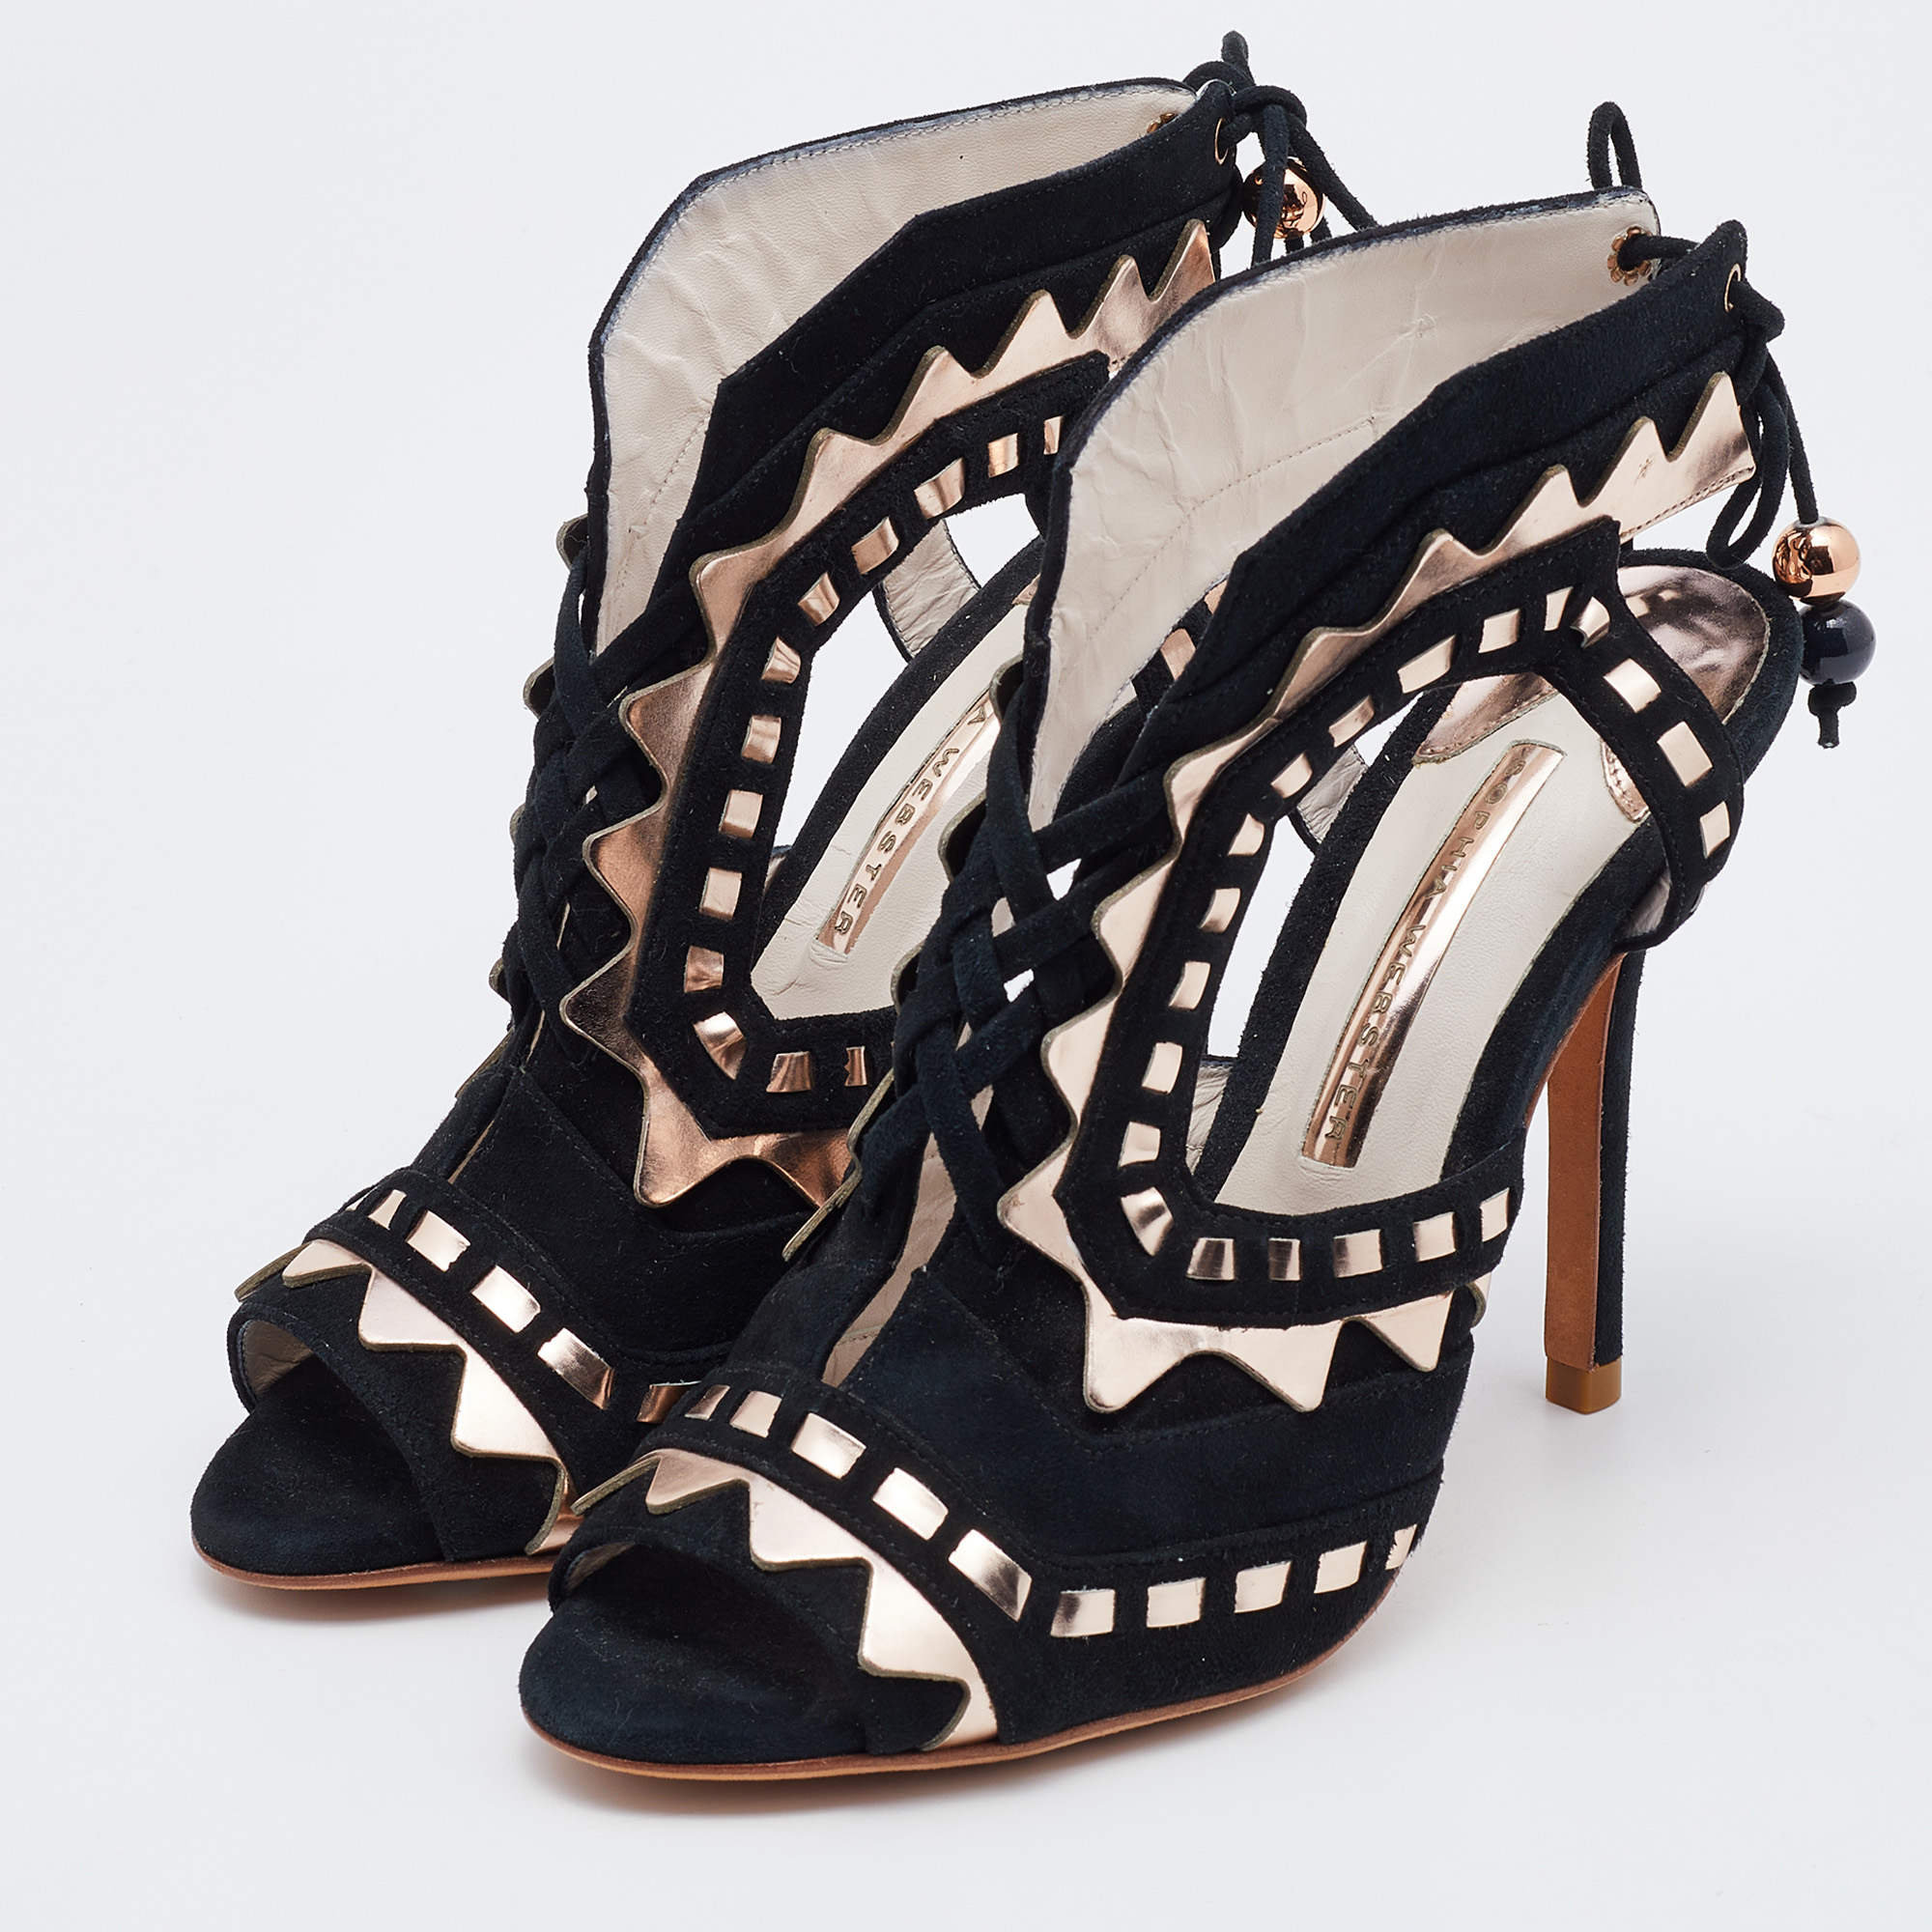 

Sophia Webster Black/Rose Gold Suede and Leather Riko Cut Out Sandals Size